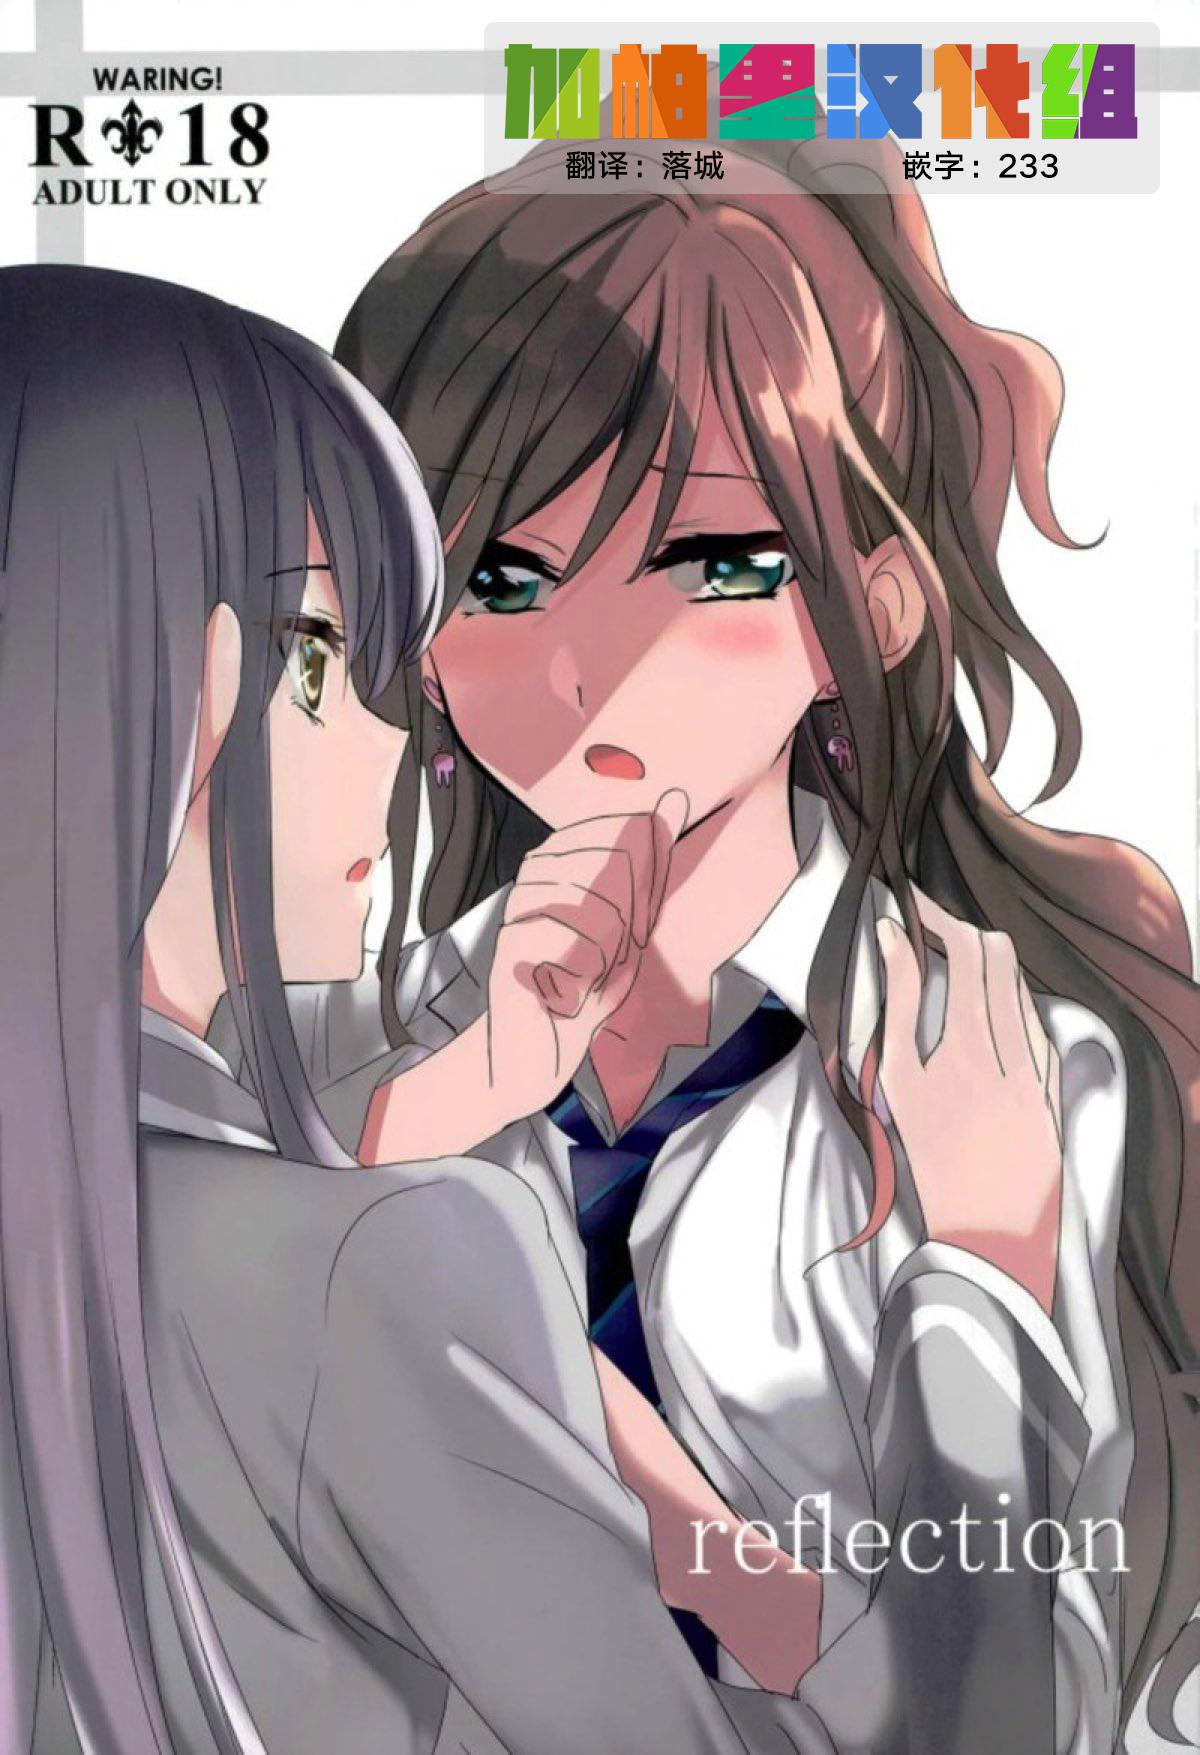 Licking Pussy reflection - Bang dream Reverse - Picture 1